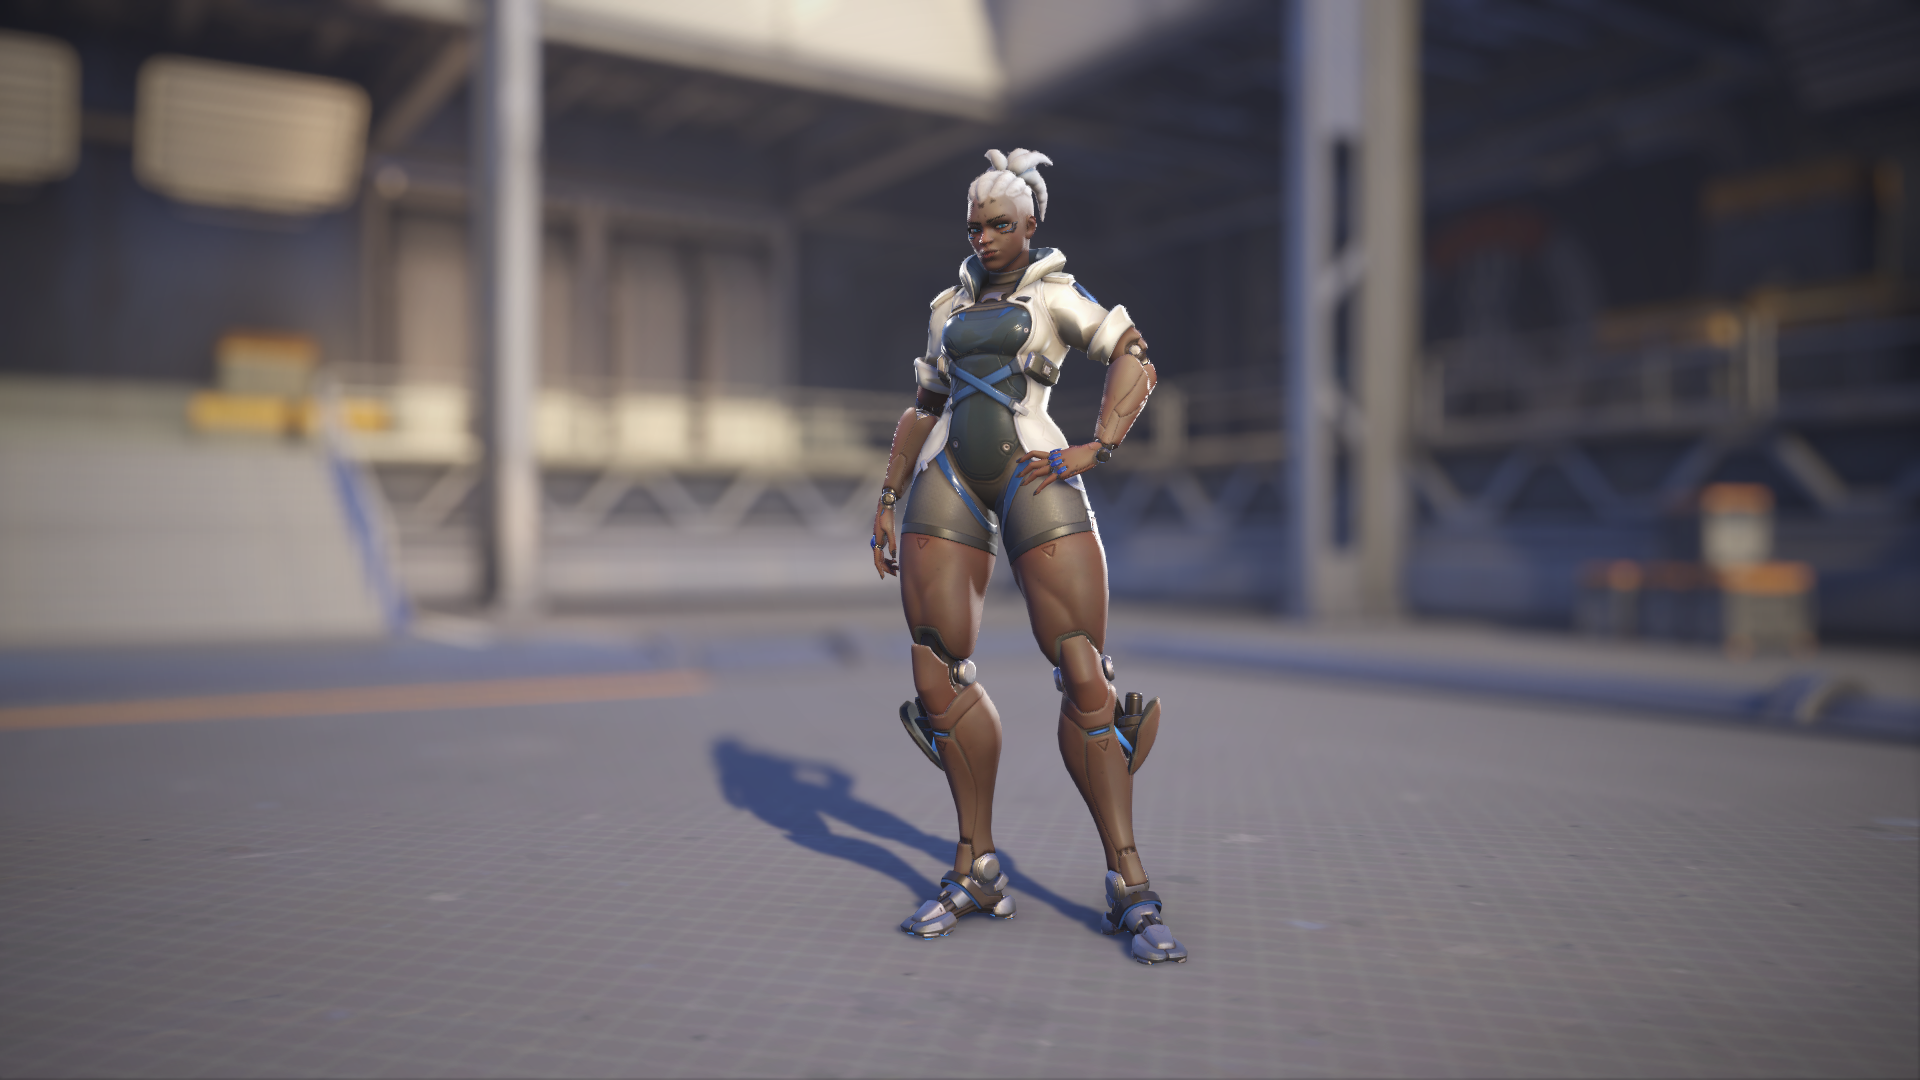 Sojourn models her Tundra skin in Overwatch 2.